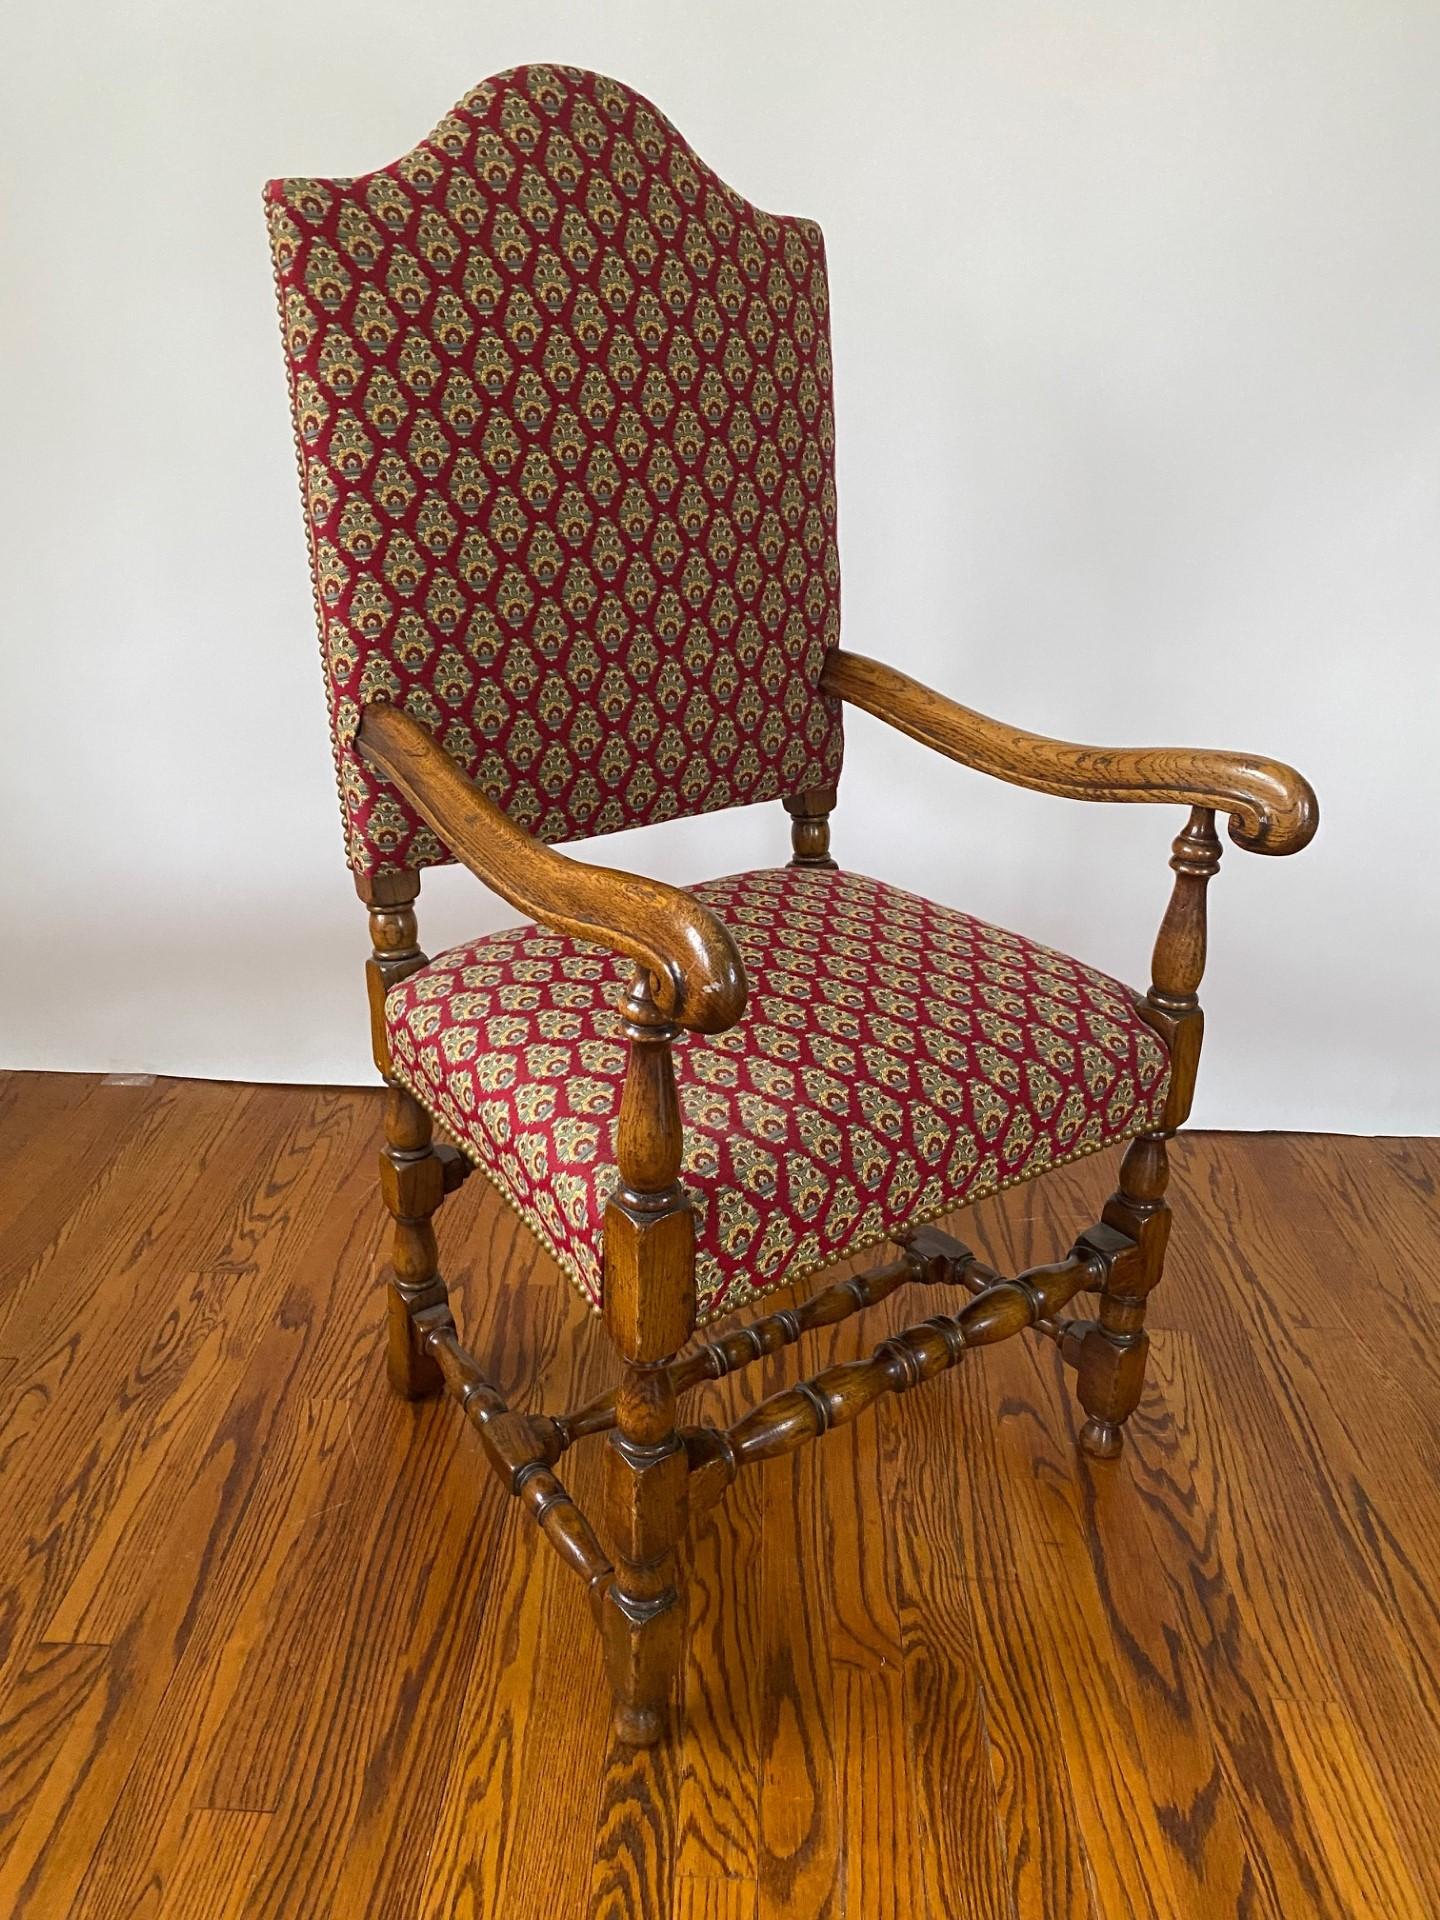 English-Made Late 17th Century Style Solid Oak High Back Side & Arm Chair In Excellent Condition For Sale In North Salem, NY